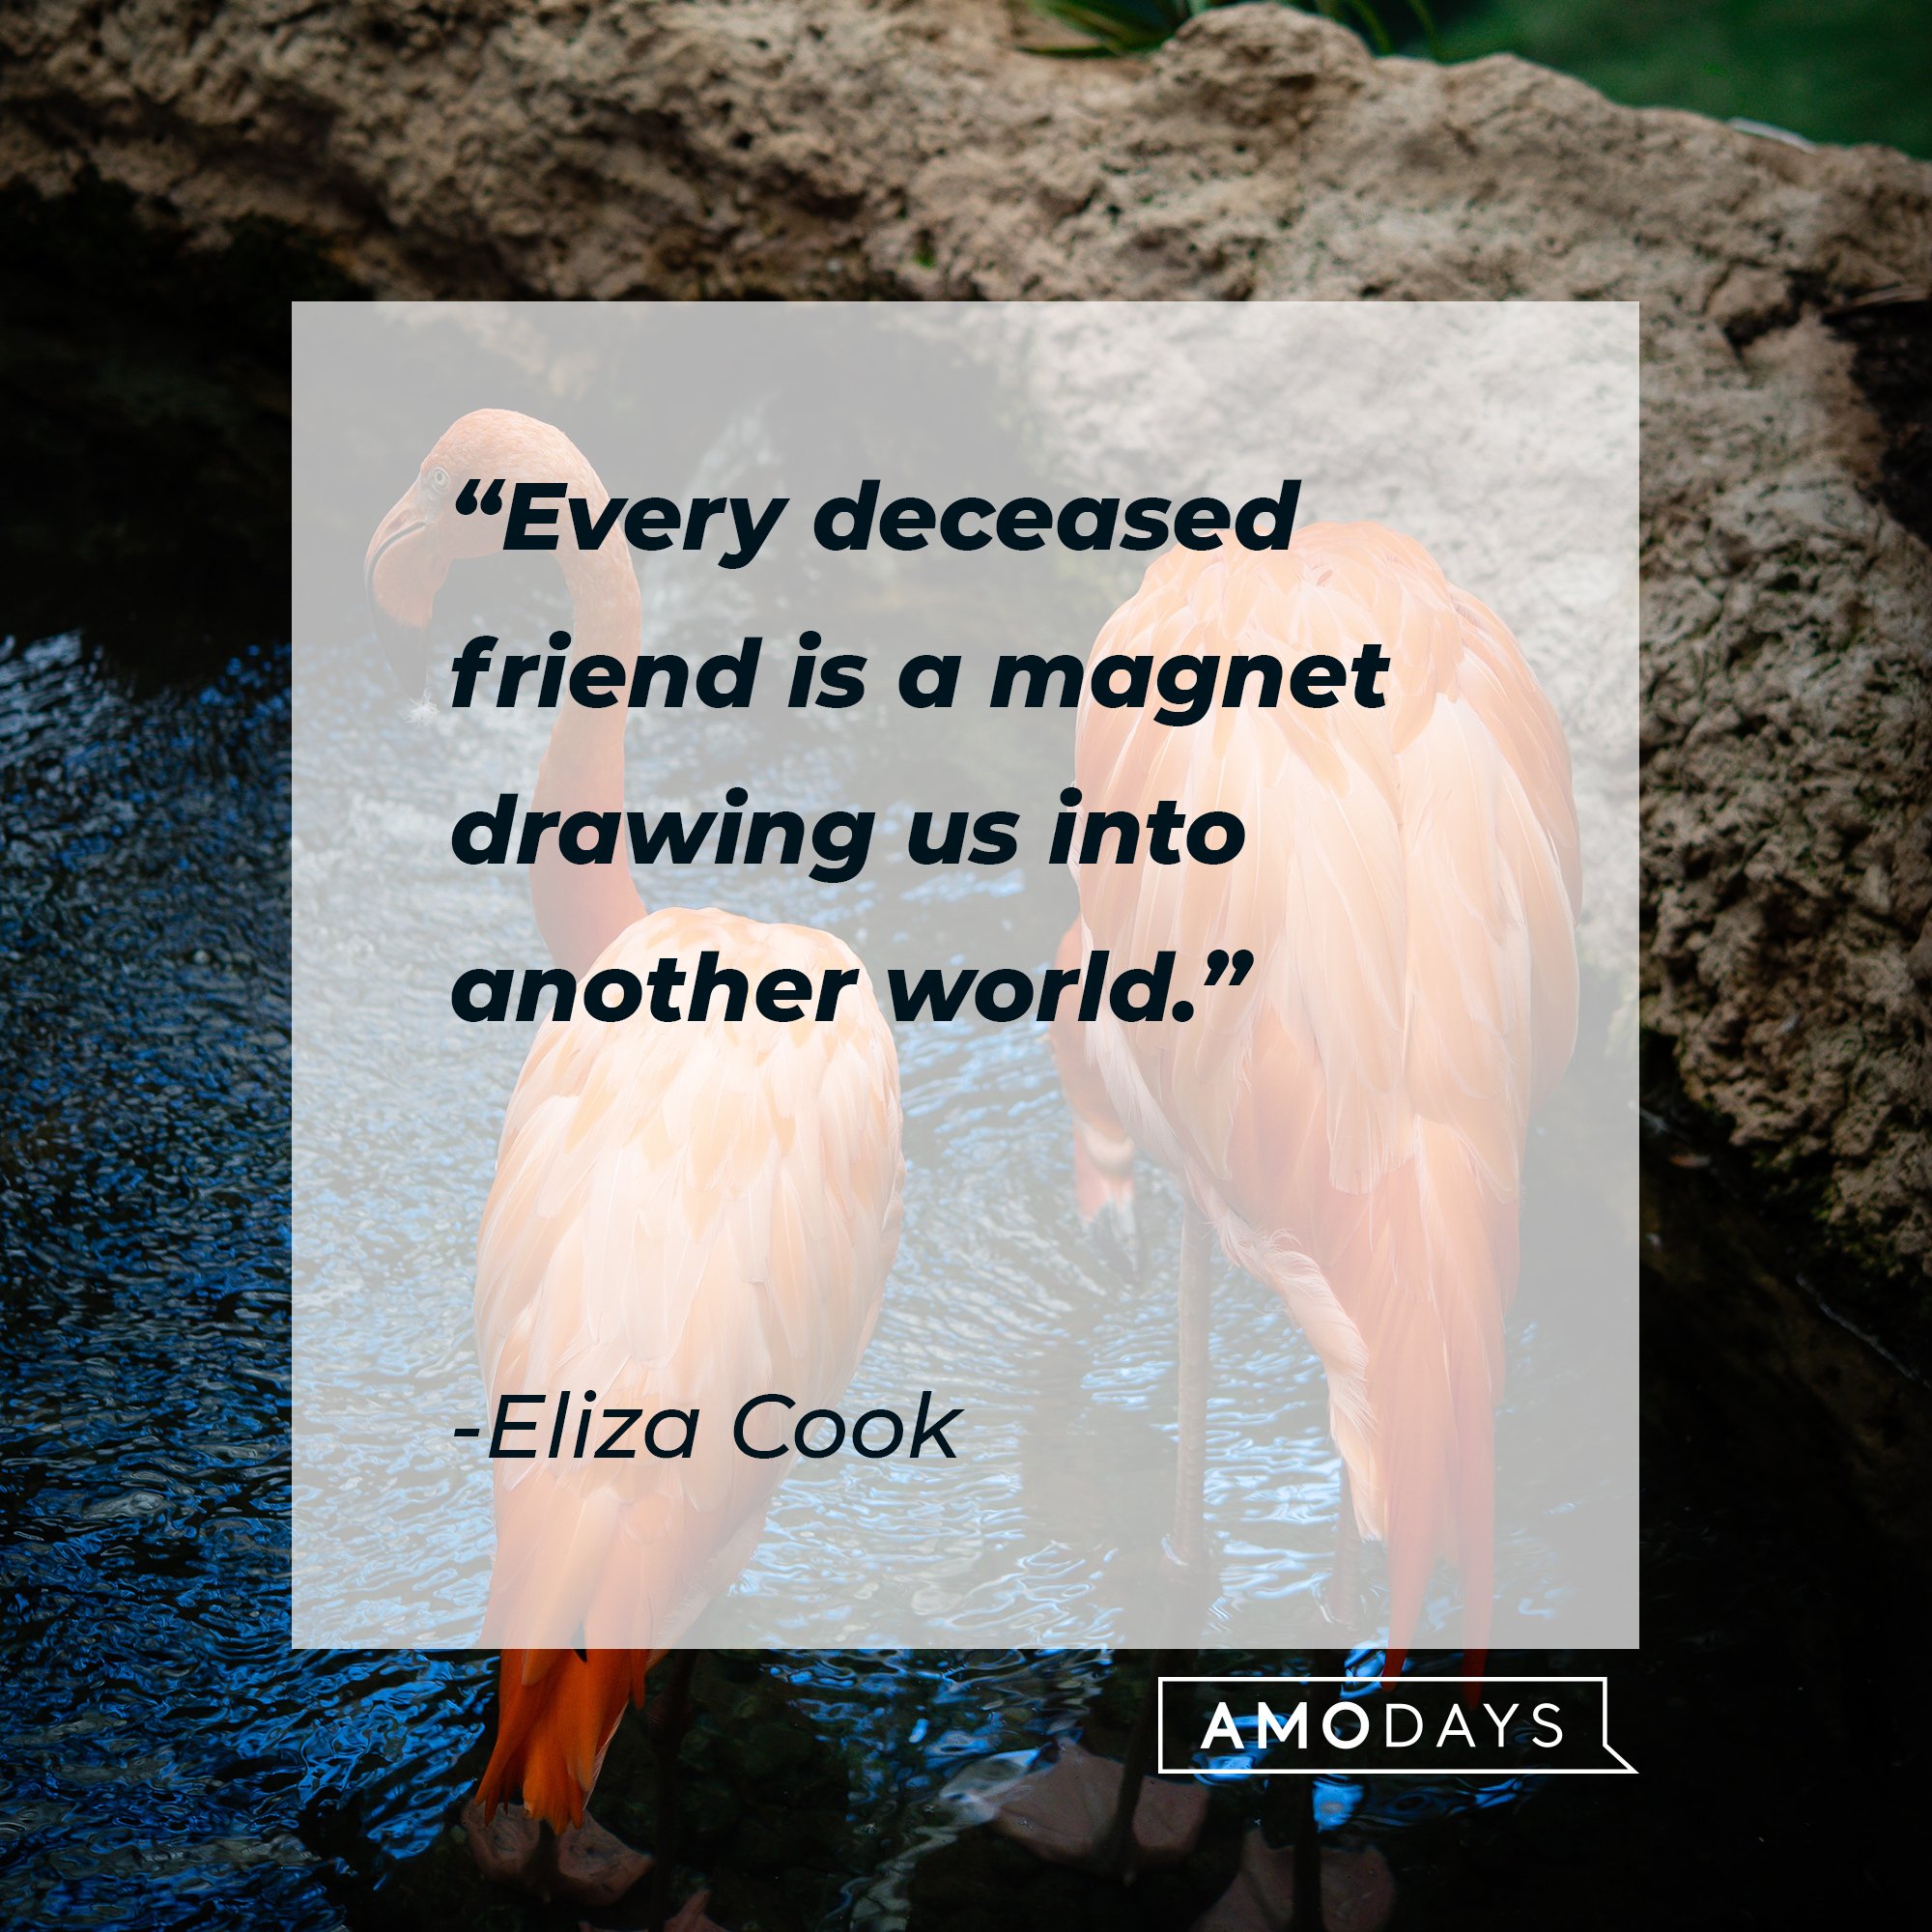 Eliza Cook’s quote: “Every deceased friend is a magnet drawing us into another world.” | Image: AmoDays